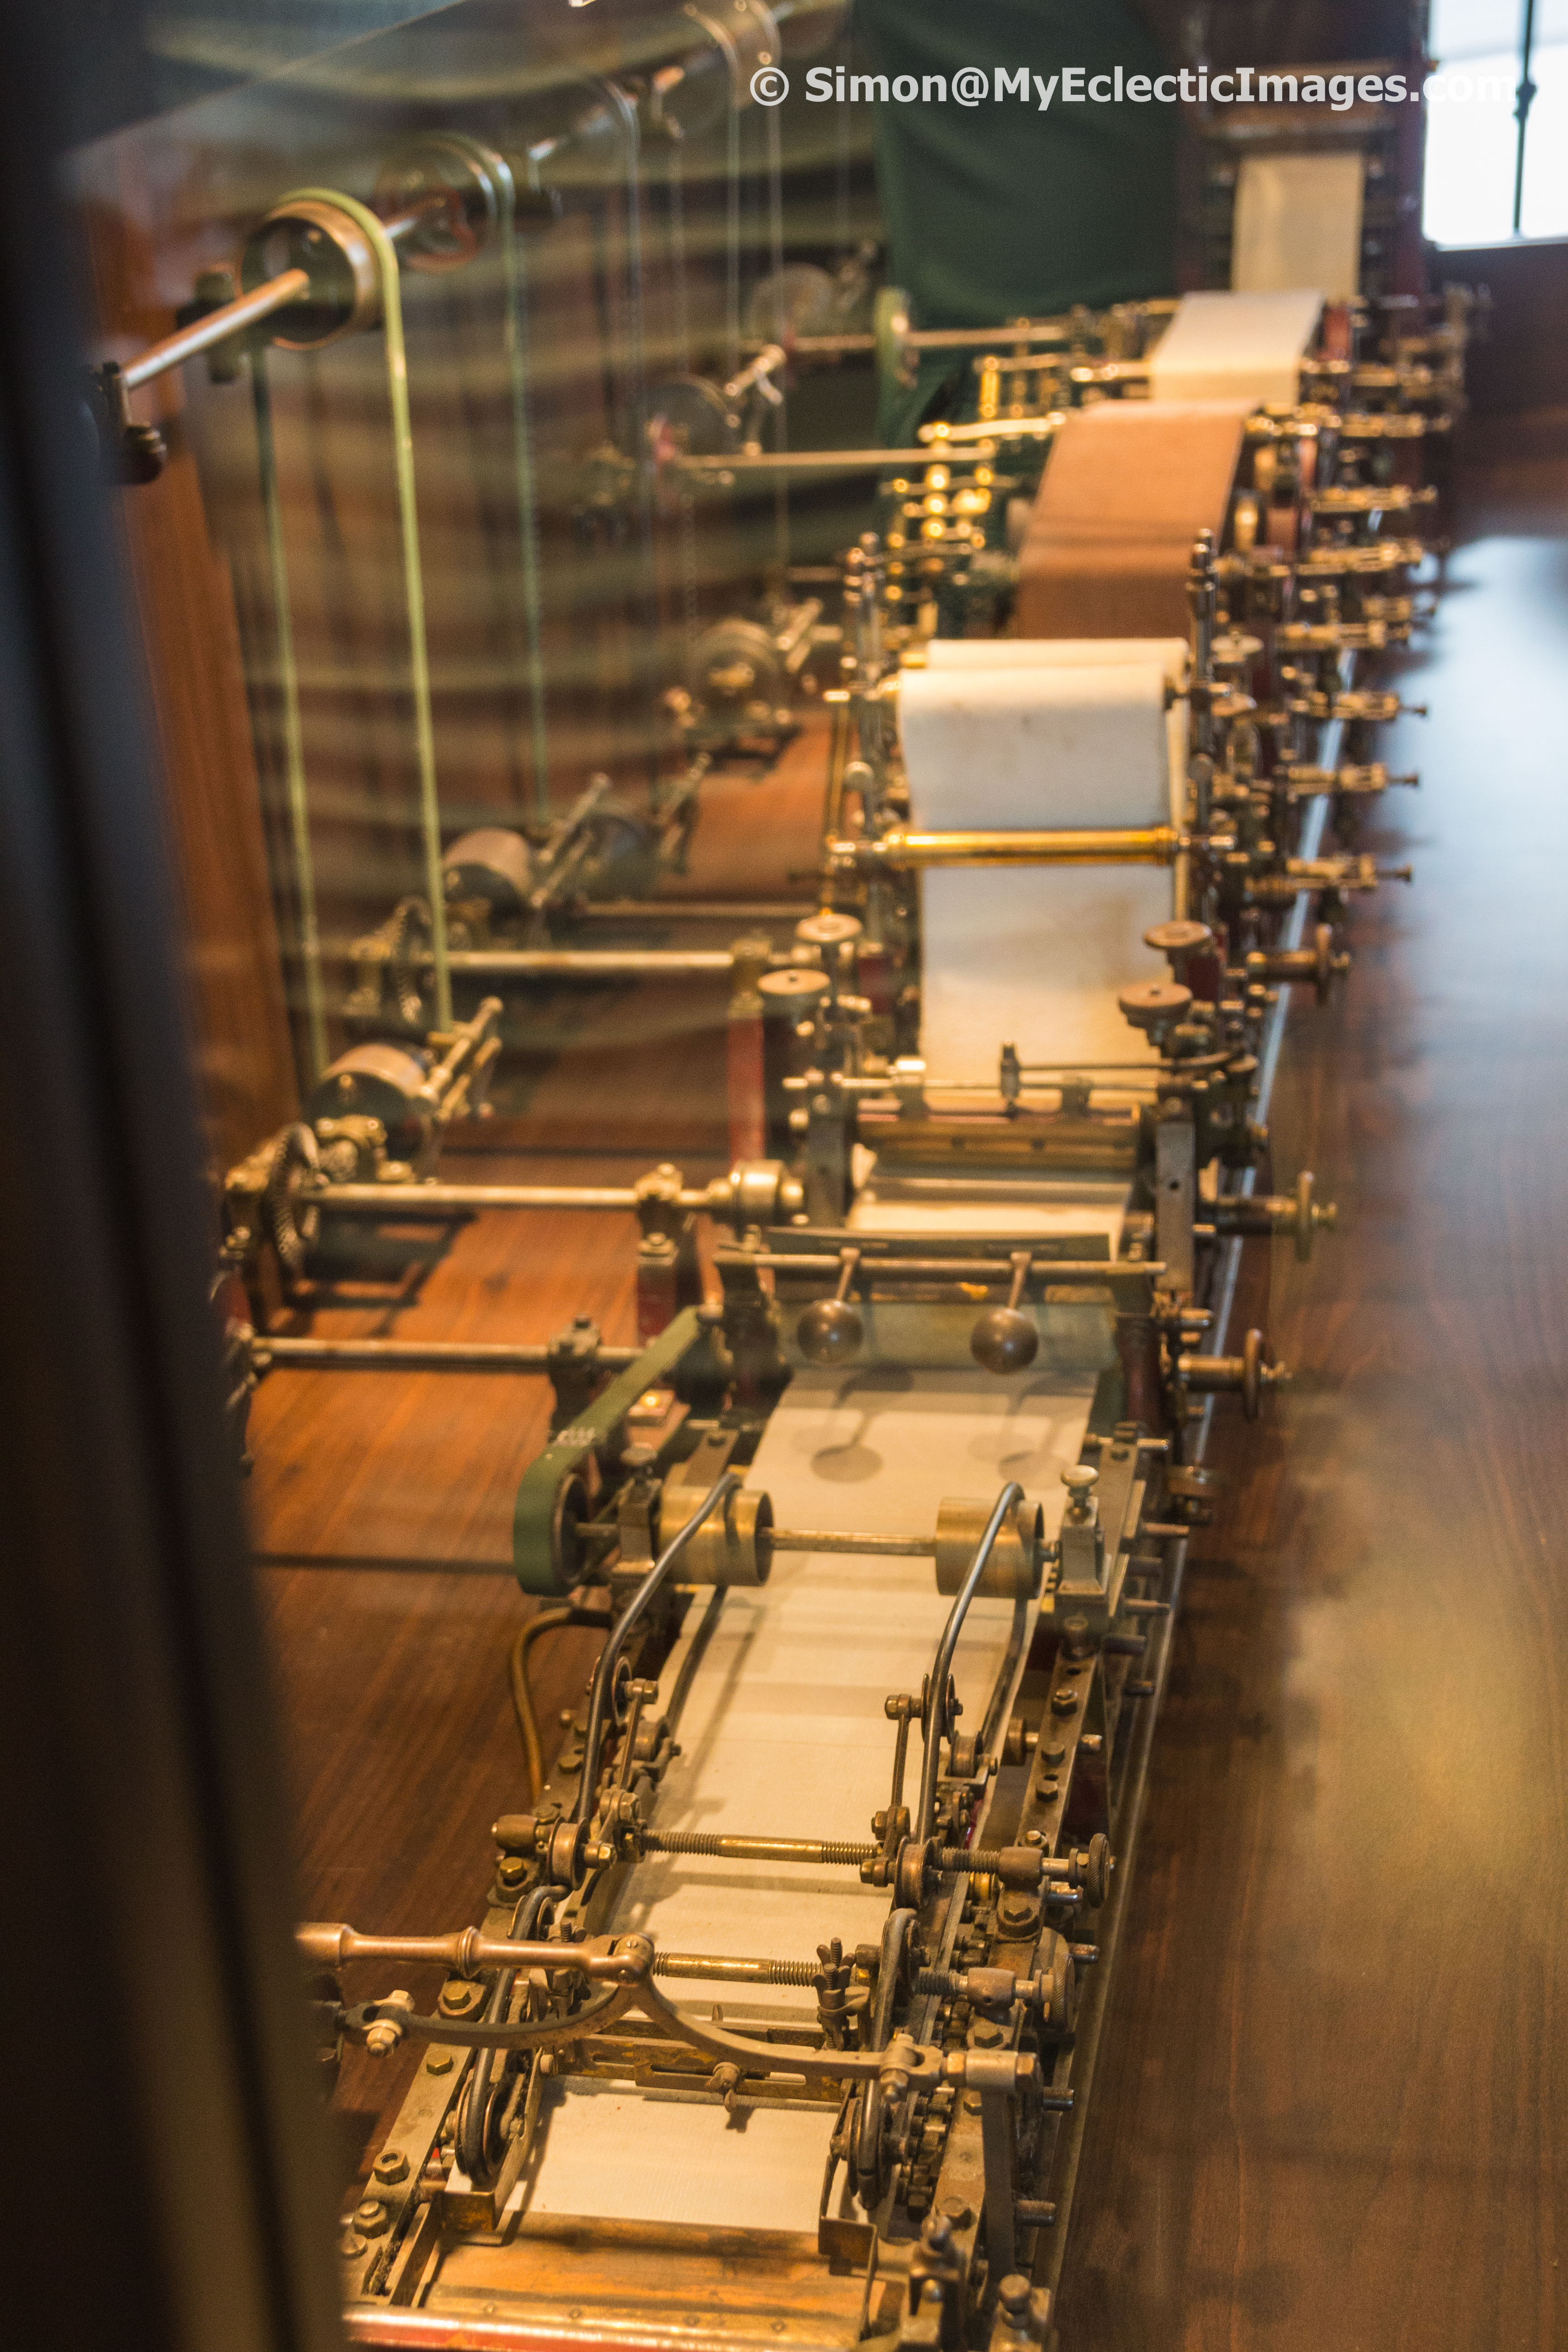 Model of a Paper Manufacturing Production Line in the Lobby of Borealis